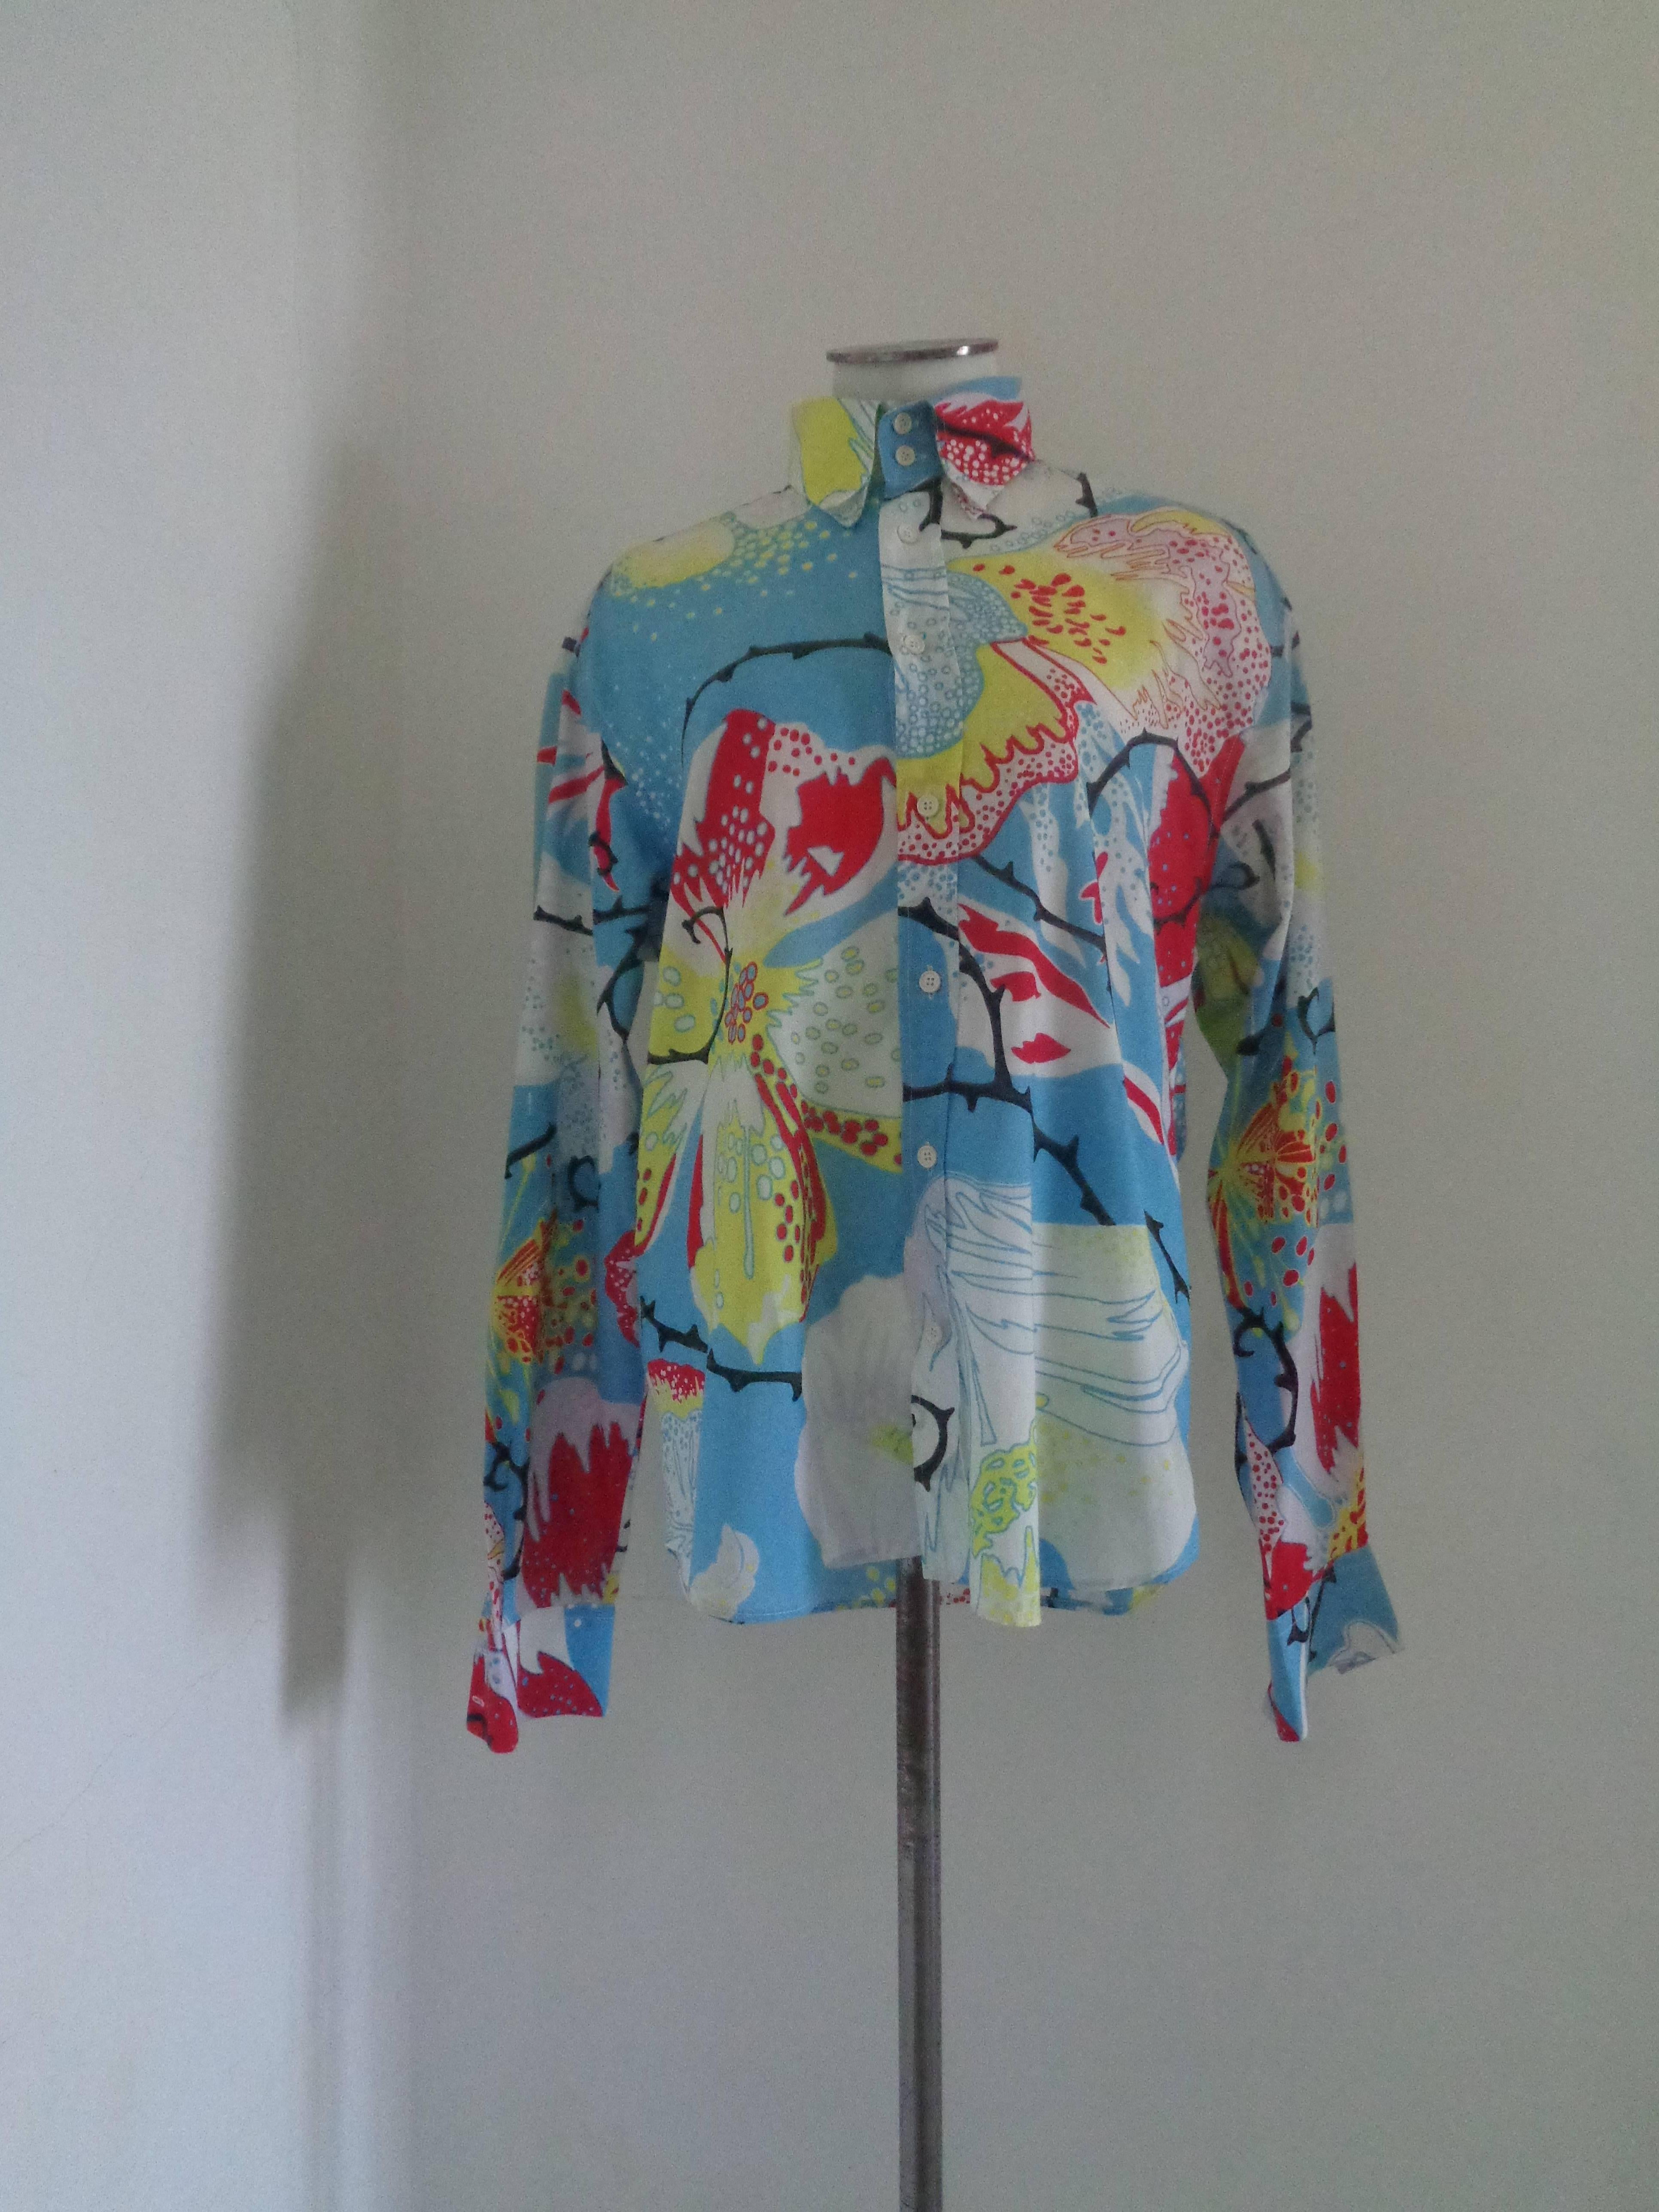 Versace light blu multicoloured Cotton Shirt

totally made in italy in italian size range L